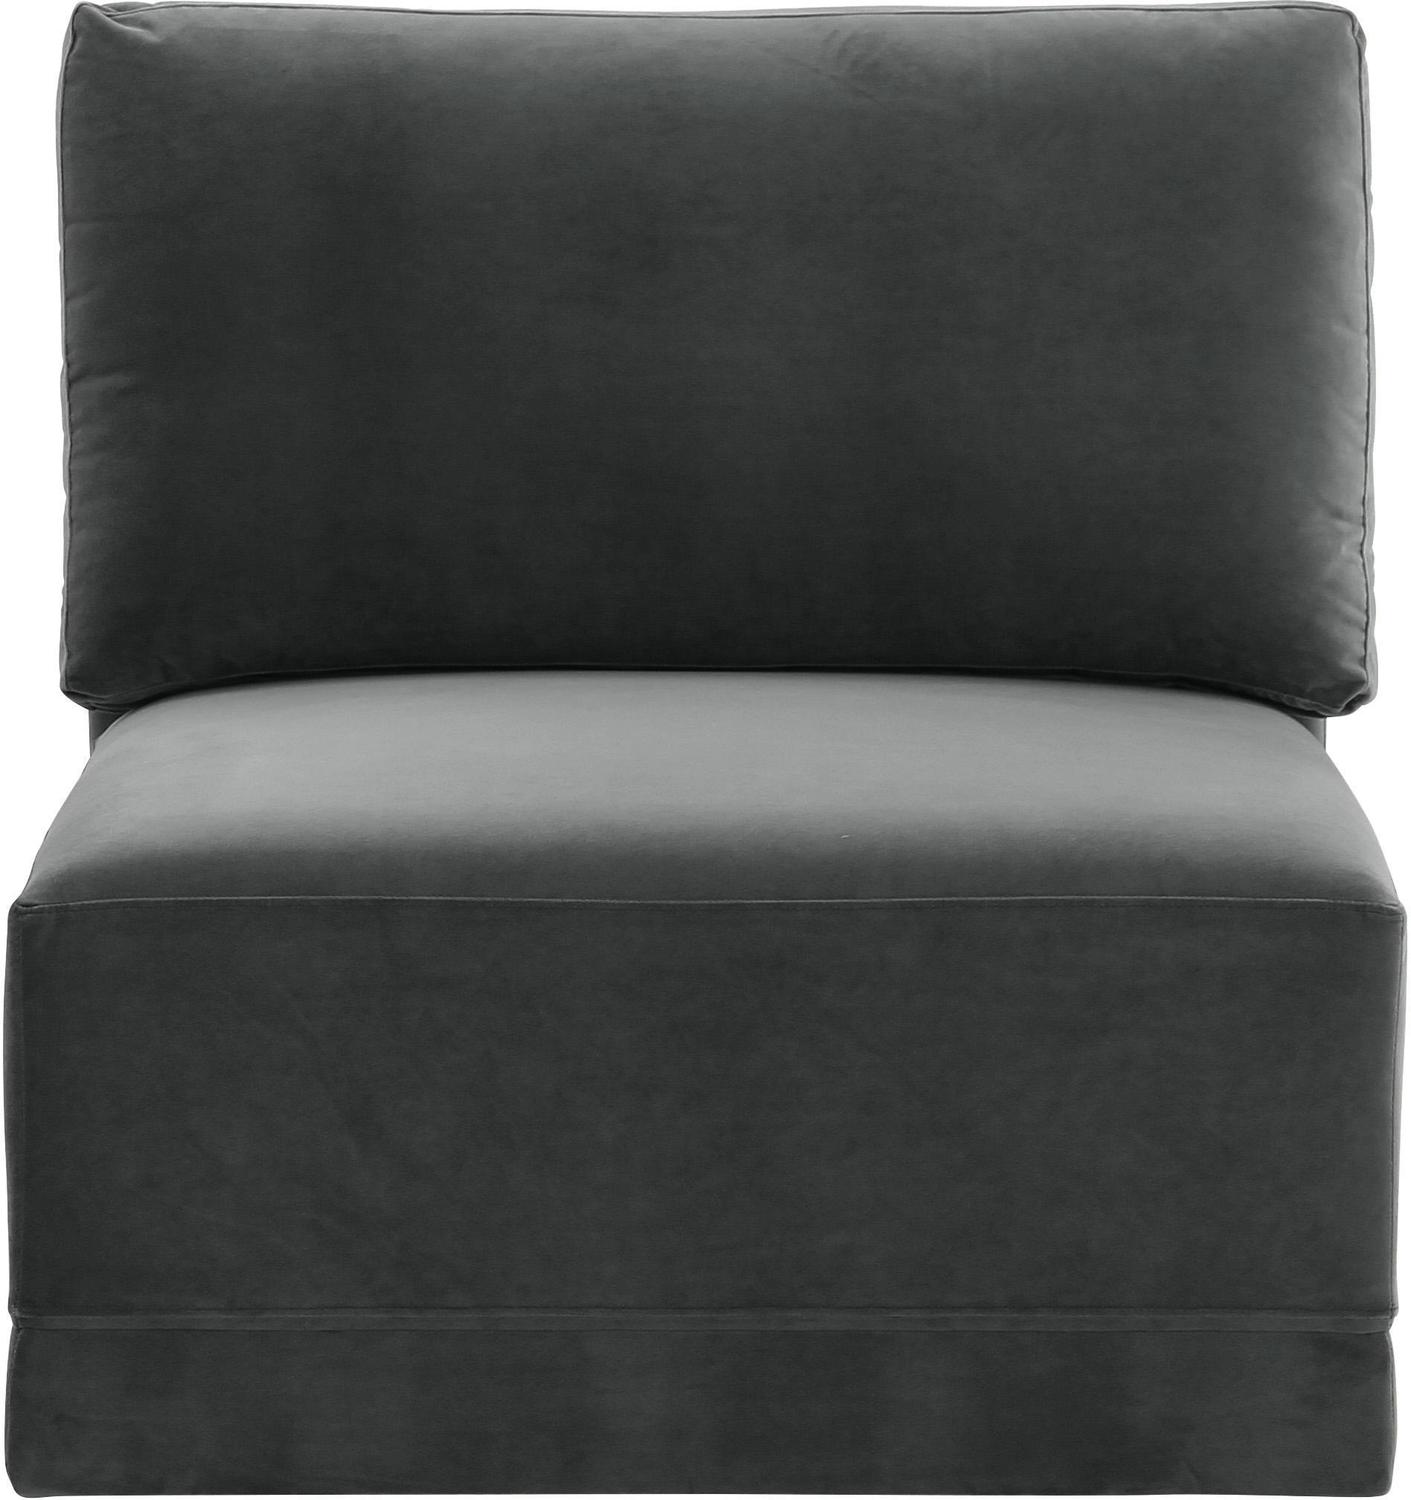 furniture life Tov Furniture Sectionals Charcoal